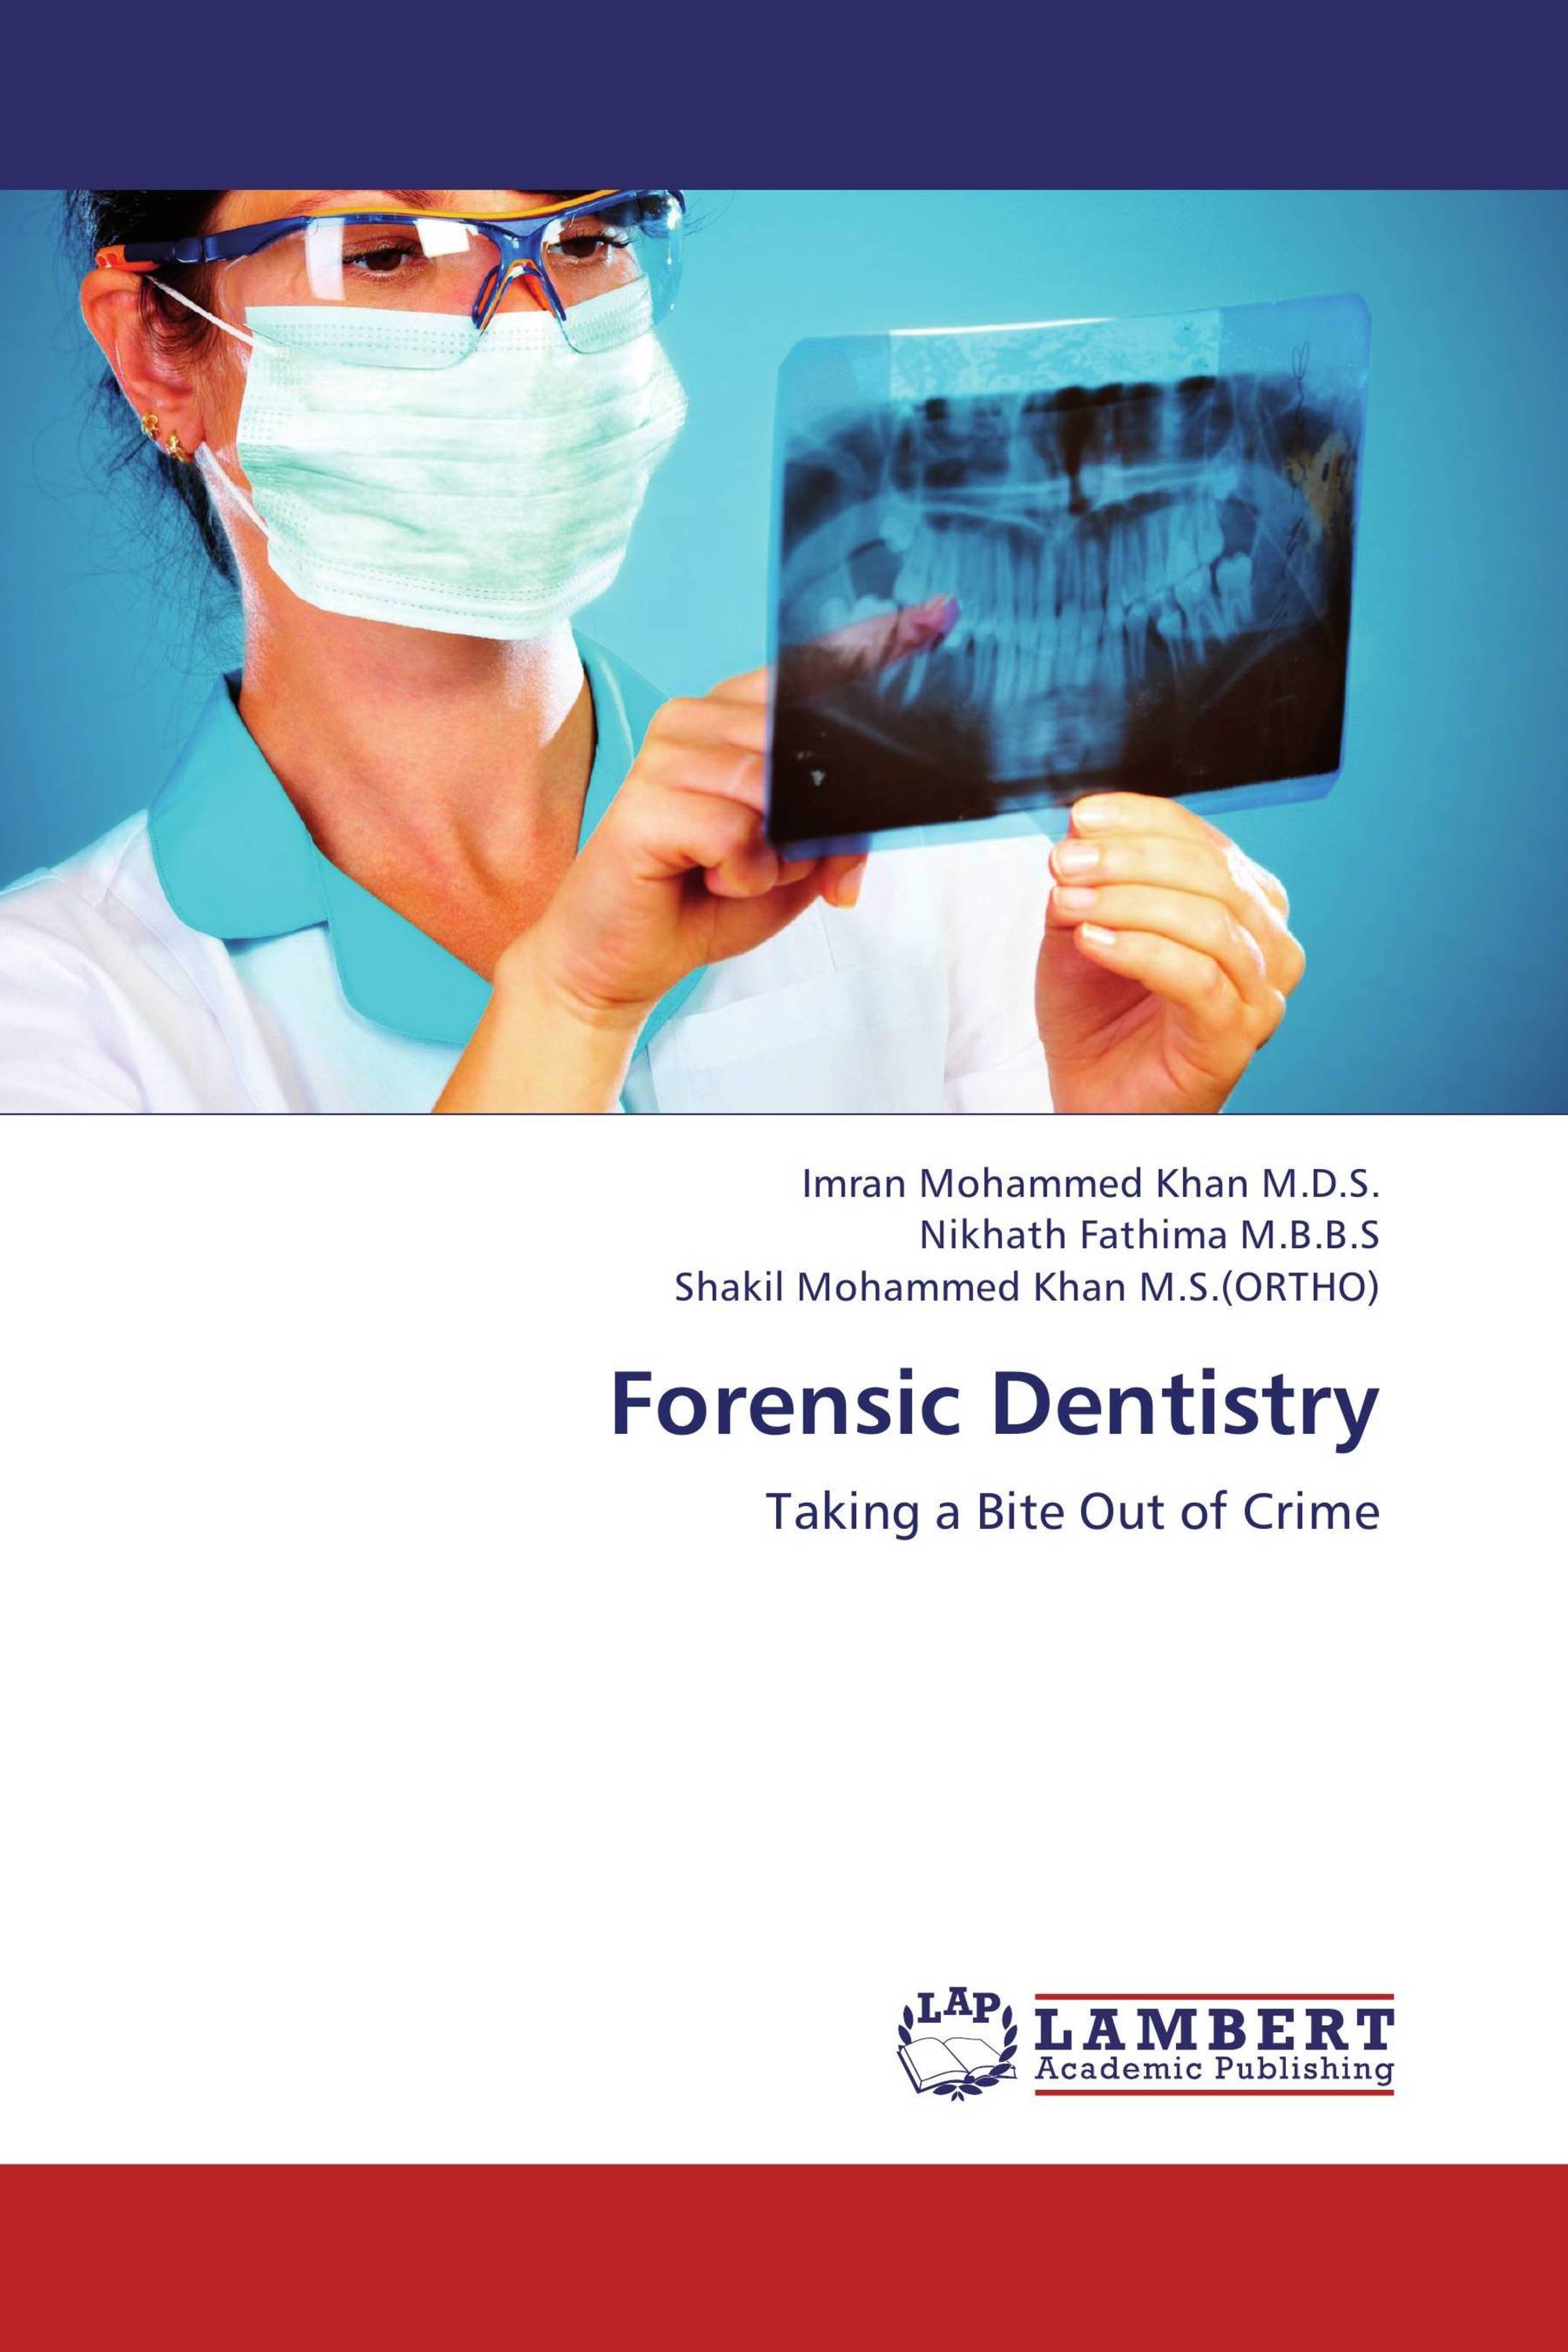 research topics in forensic dentistry